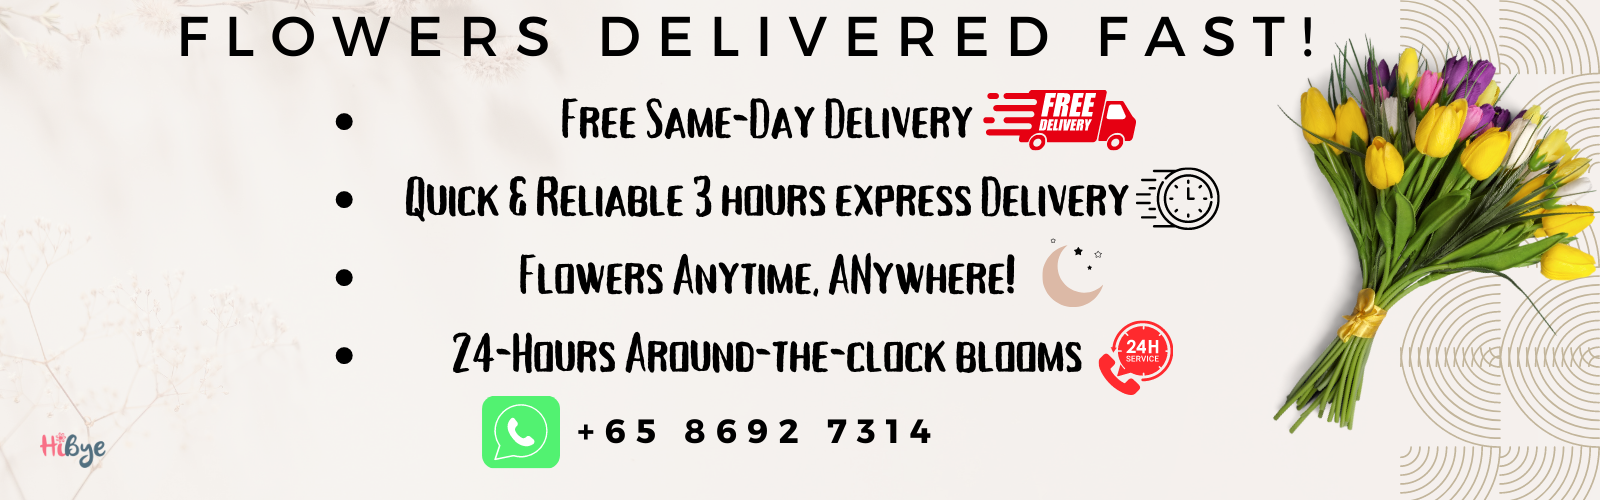 Express Delivery Banner